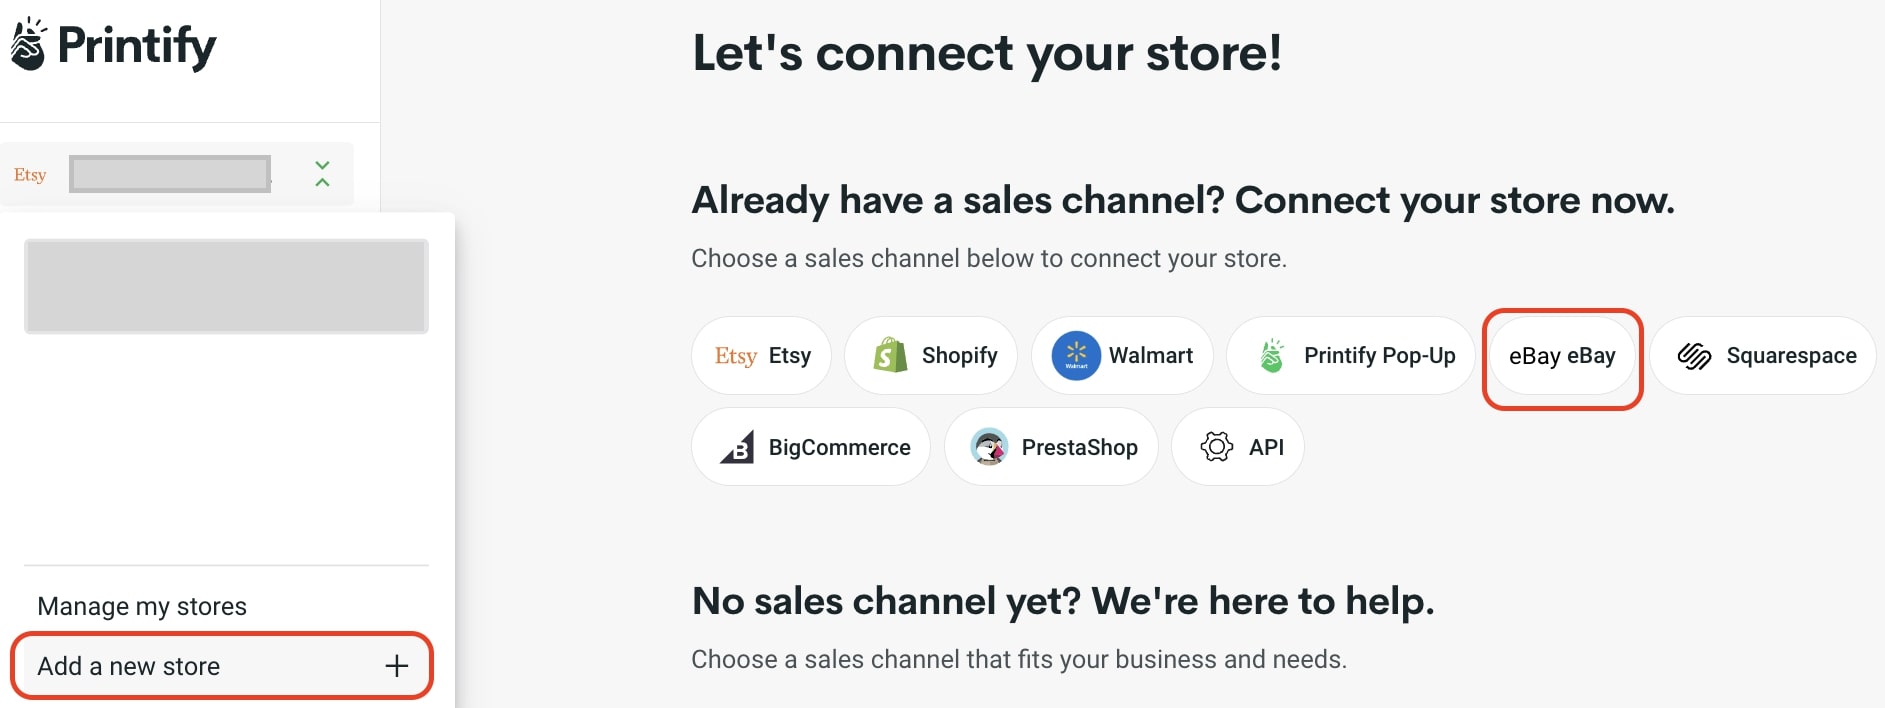 The My Stores section in your Printify account, with the options "Add a new store" and "eBay" highlighted in red amid other sales channels, which includes Etsy, Shopify, Walmart, Printify Pop-Up, Squarespace, BigCommerce, PrestaShop, and the custom API.